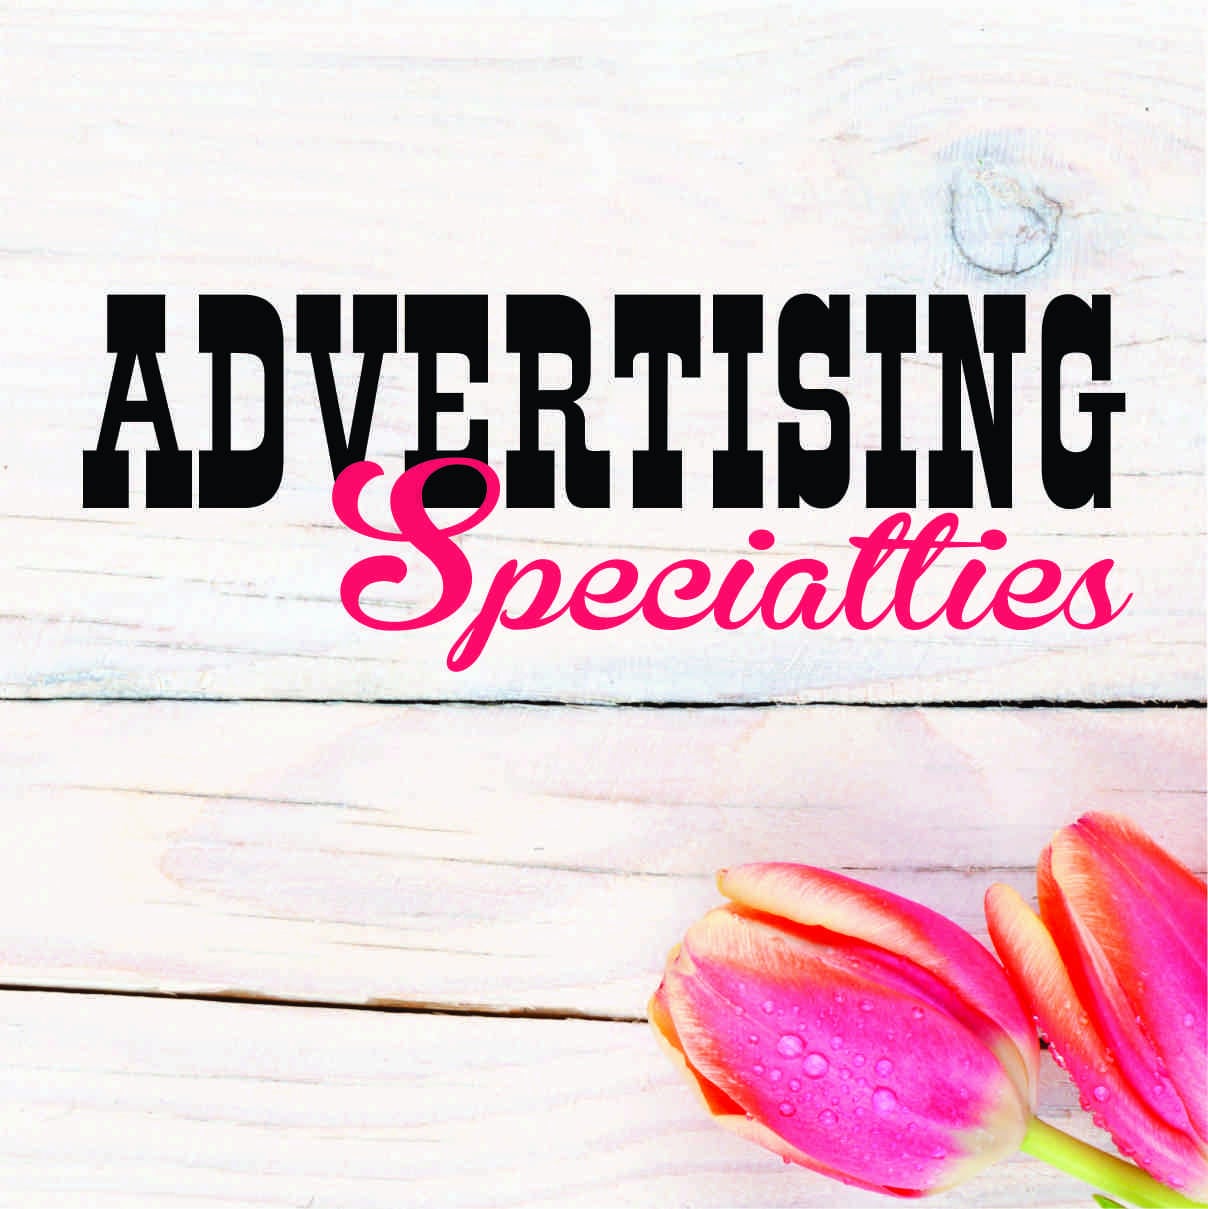 Advertising Specialties by AdSpecial on Etsy